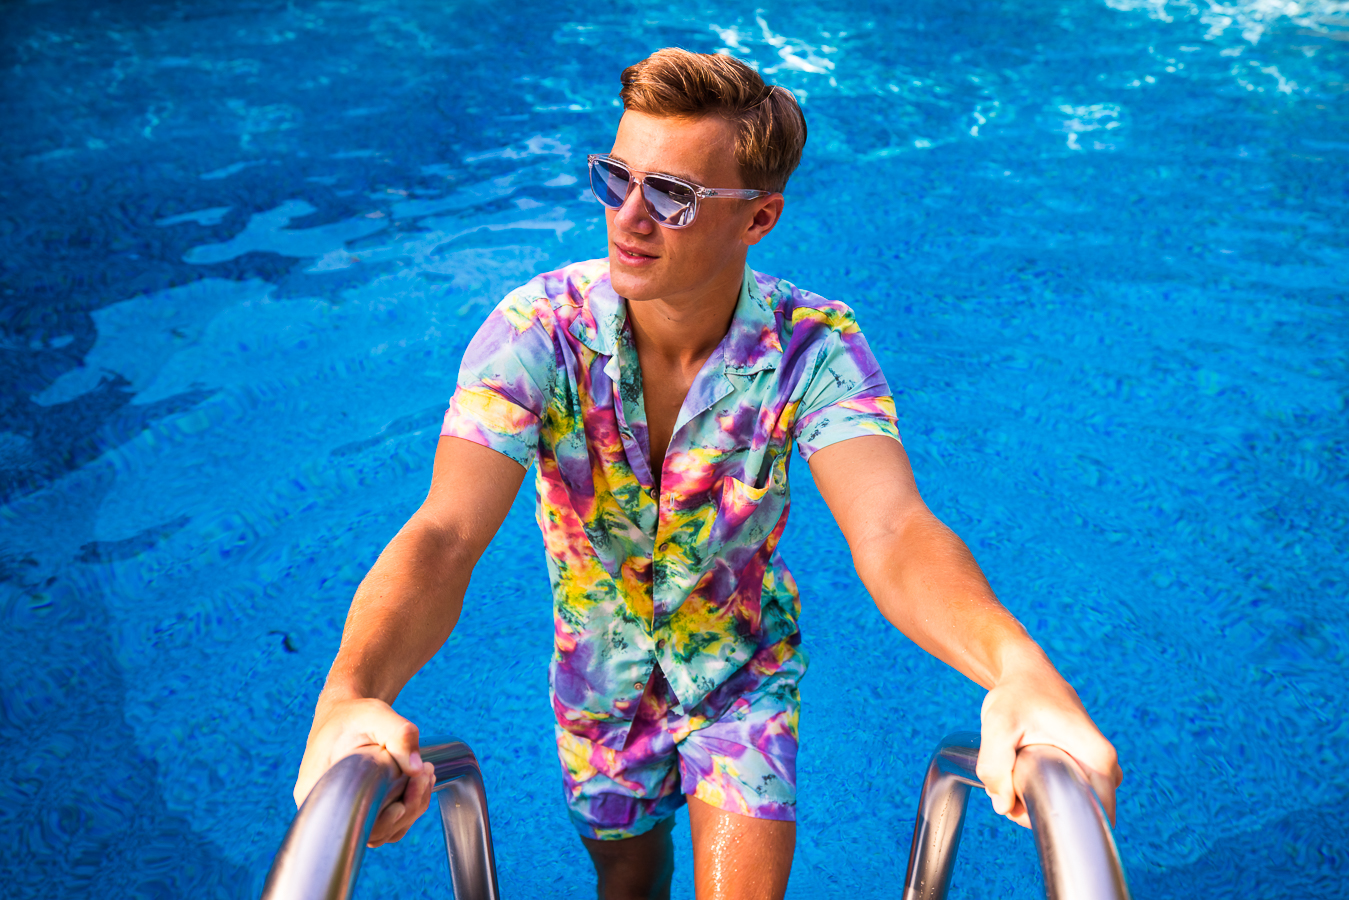 Creative Senior Portrait Photographer, lisa rhinehart, captures this vibrant, colorful, unique summer senior portrait session as he is dressed in a vibrant top and bottoms with sunglasses on for this outdoor senior session